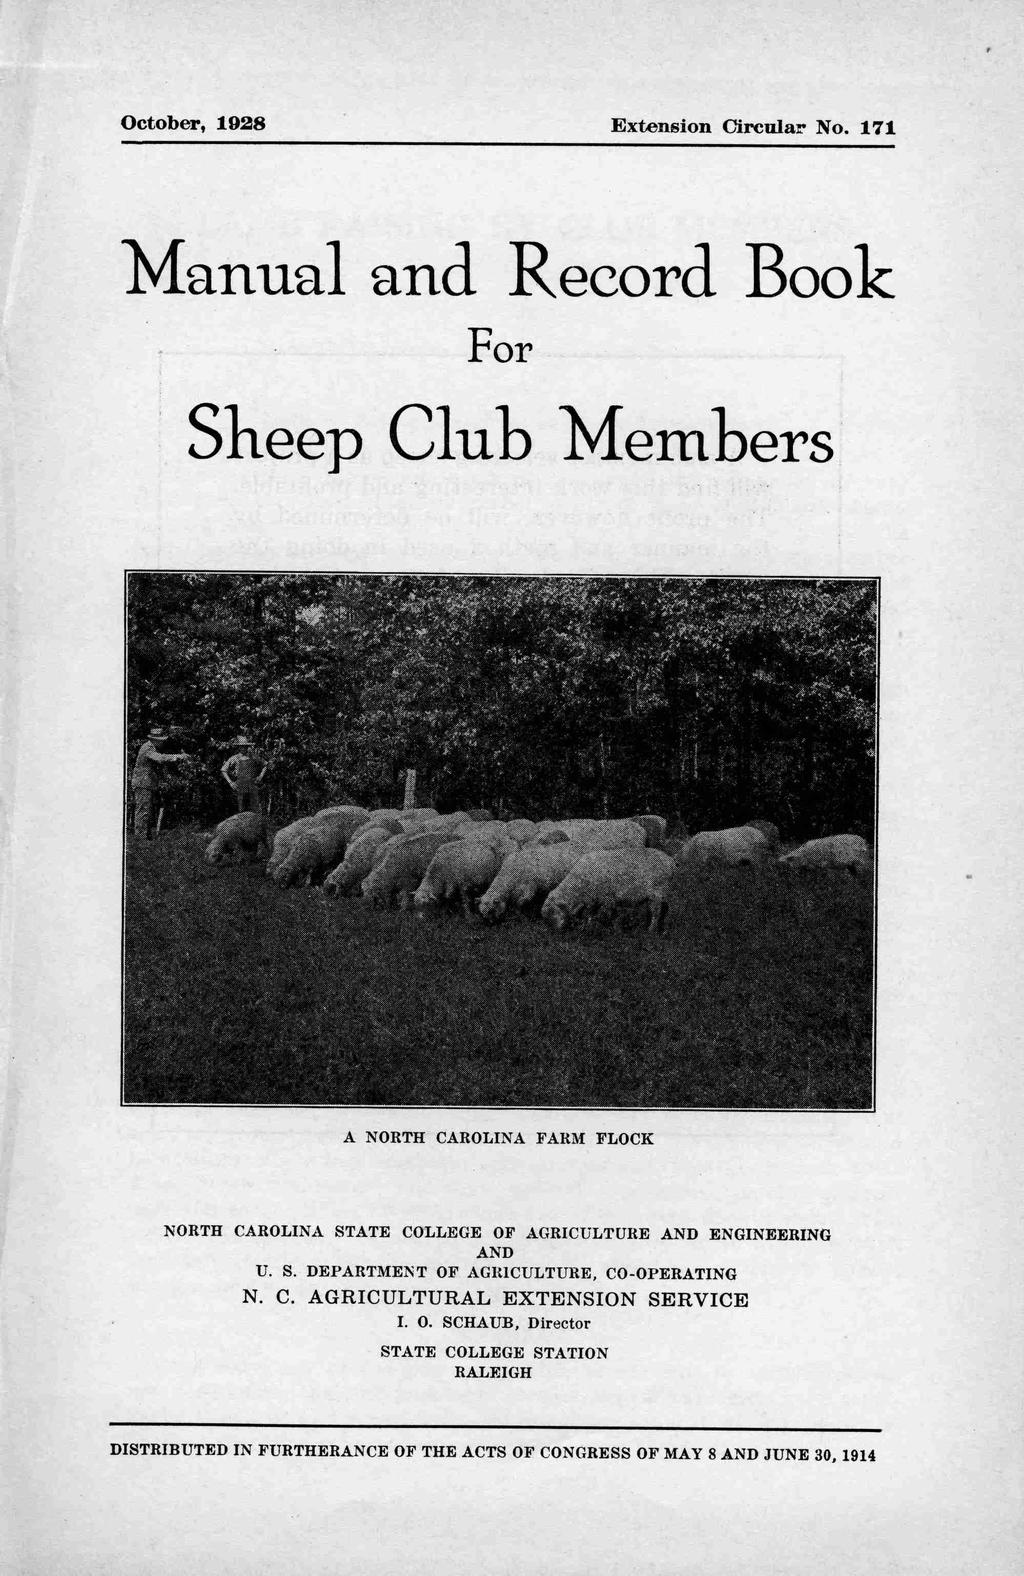 October, 1928 Extension Circular No. 171 Manual and Record Book For 1 Sheep Club Members A NORTH CAROLINA FARM FLOCK NORTH CAROLINA STATE COLLEGE OF AGRICULTURE AND ENGINEERING AND U.